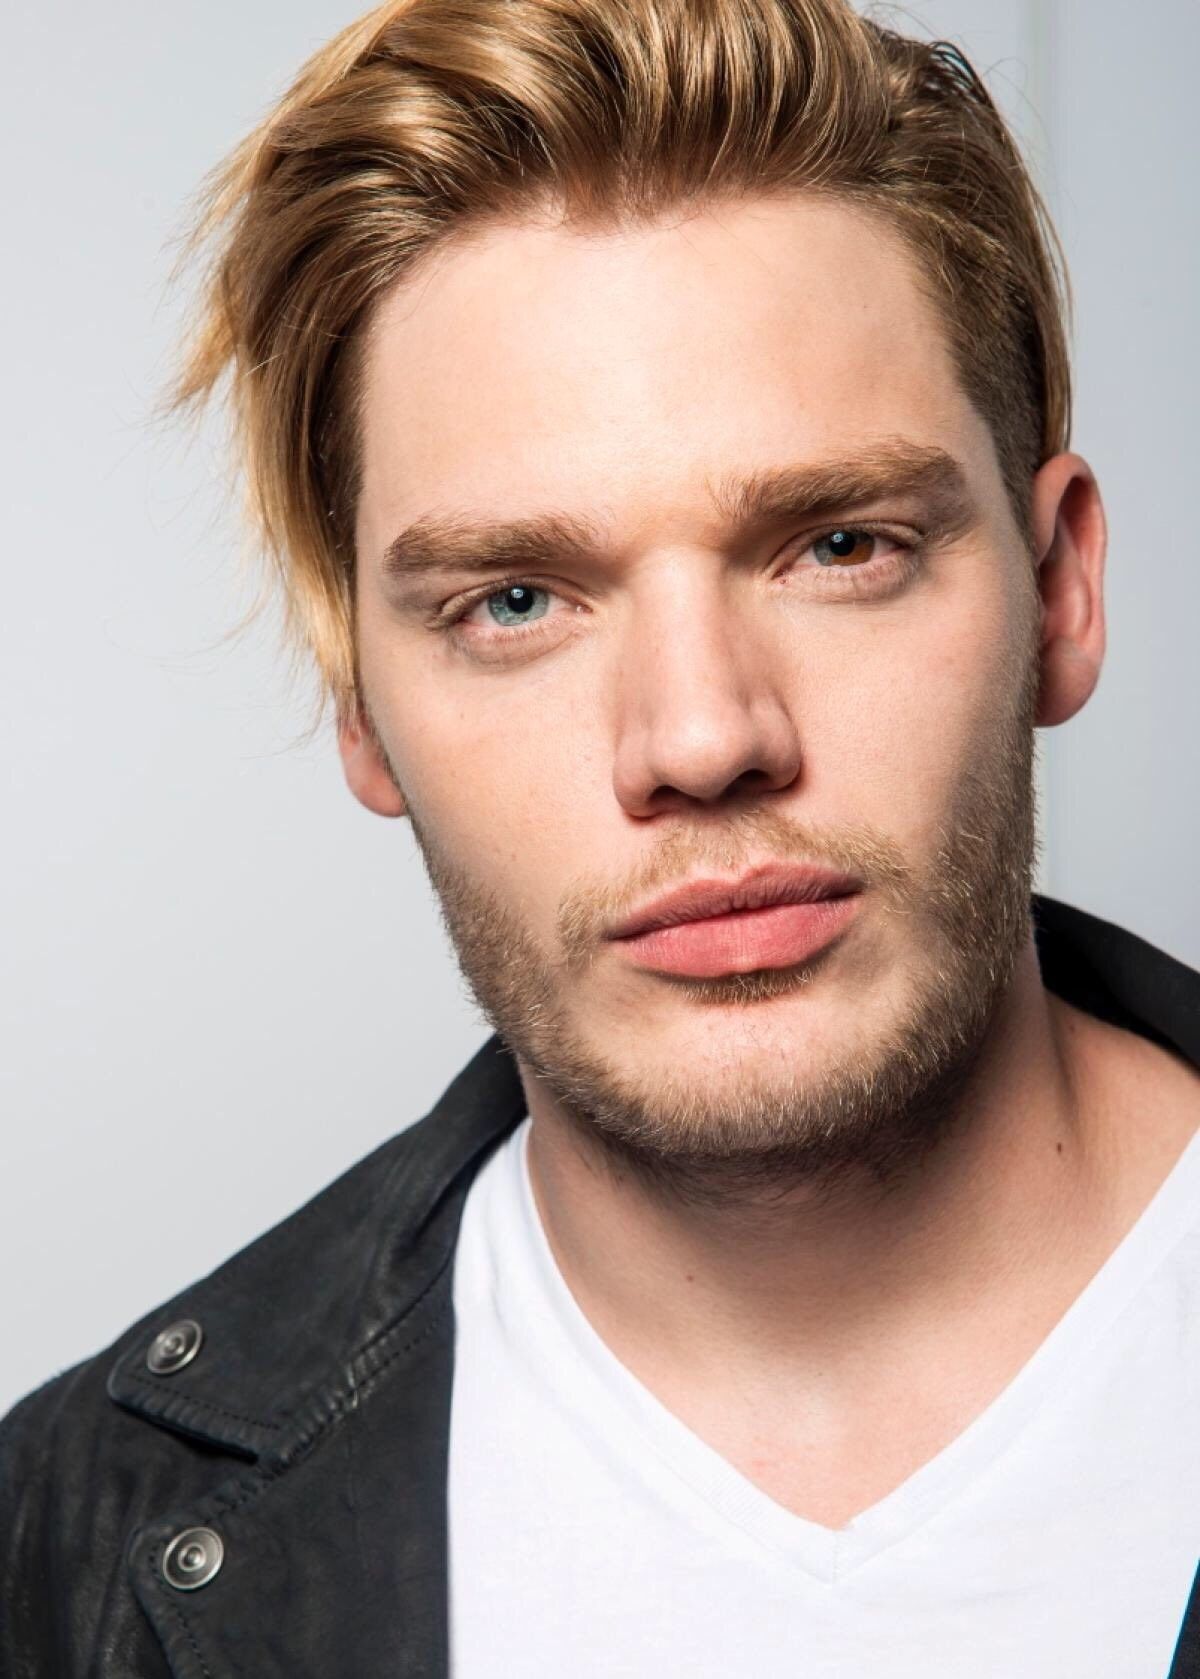 Dominic SHERWOOD, Biography and movies